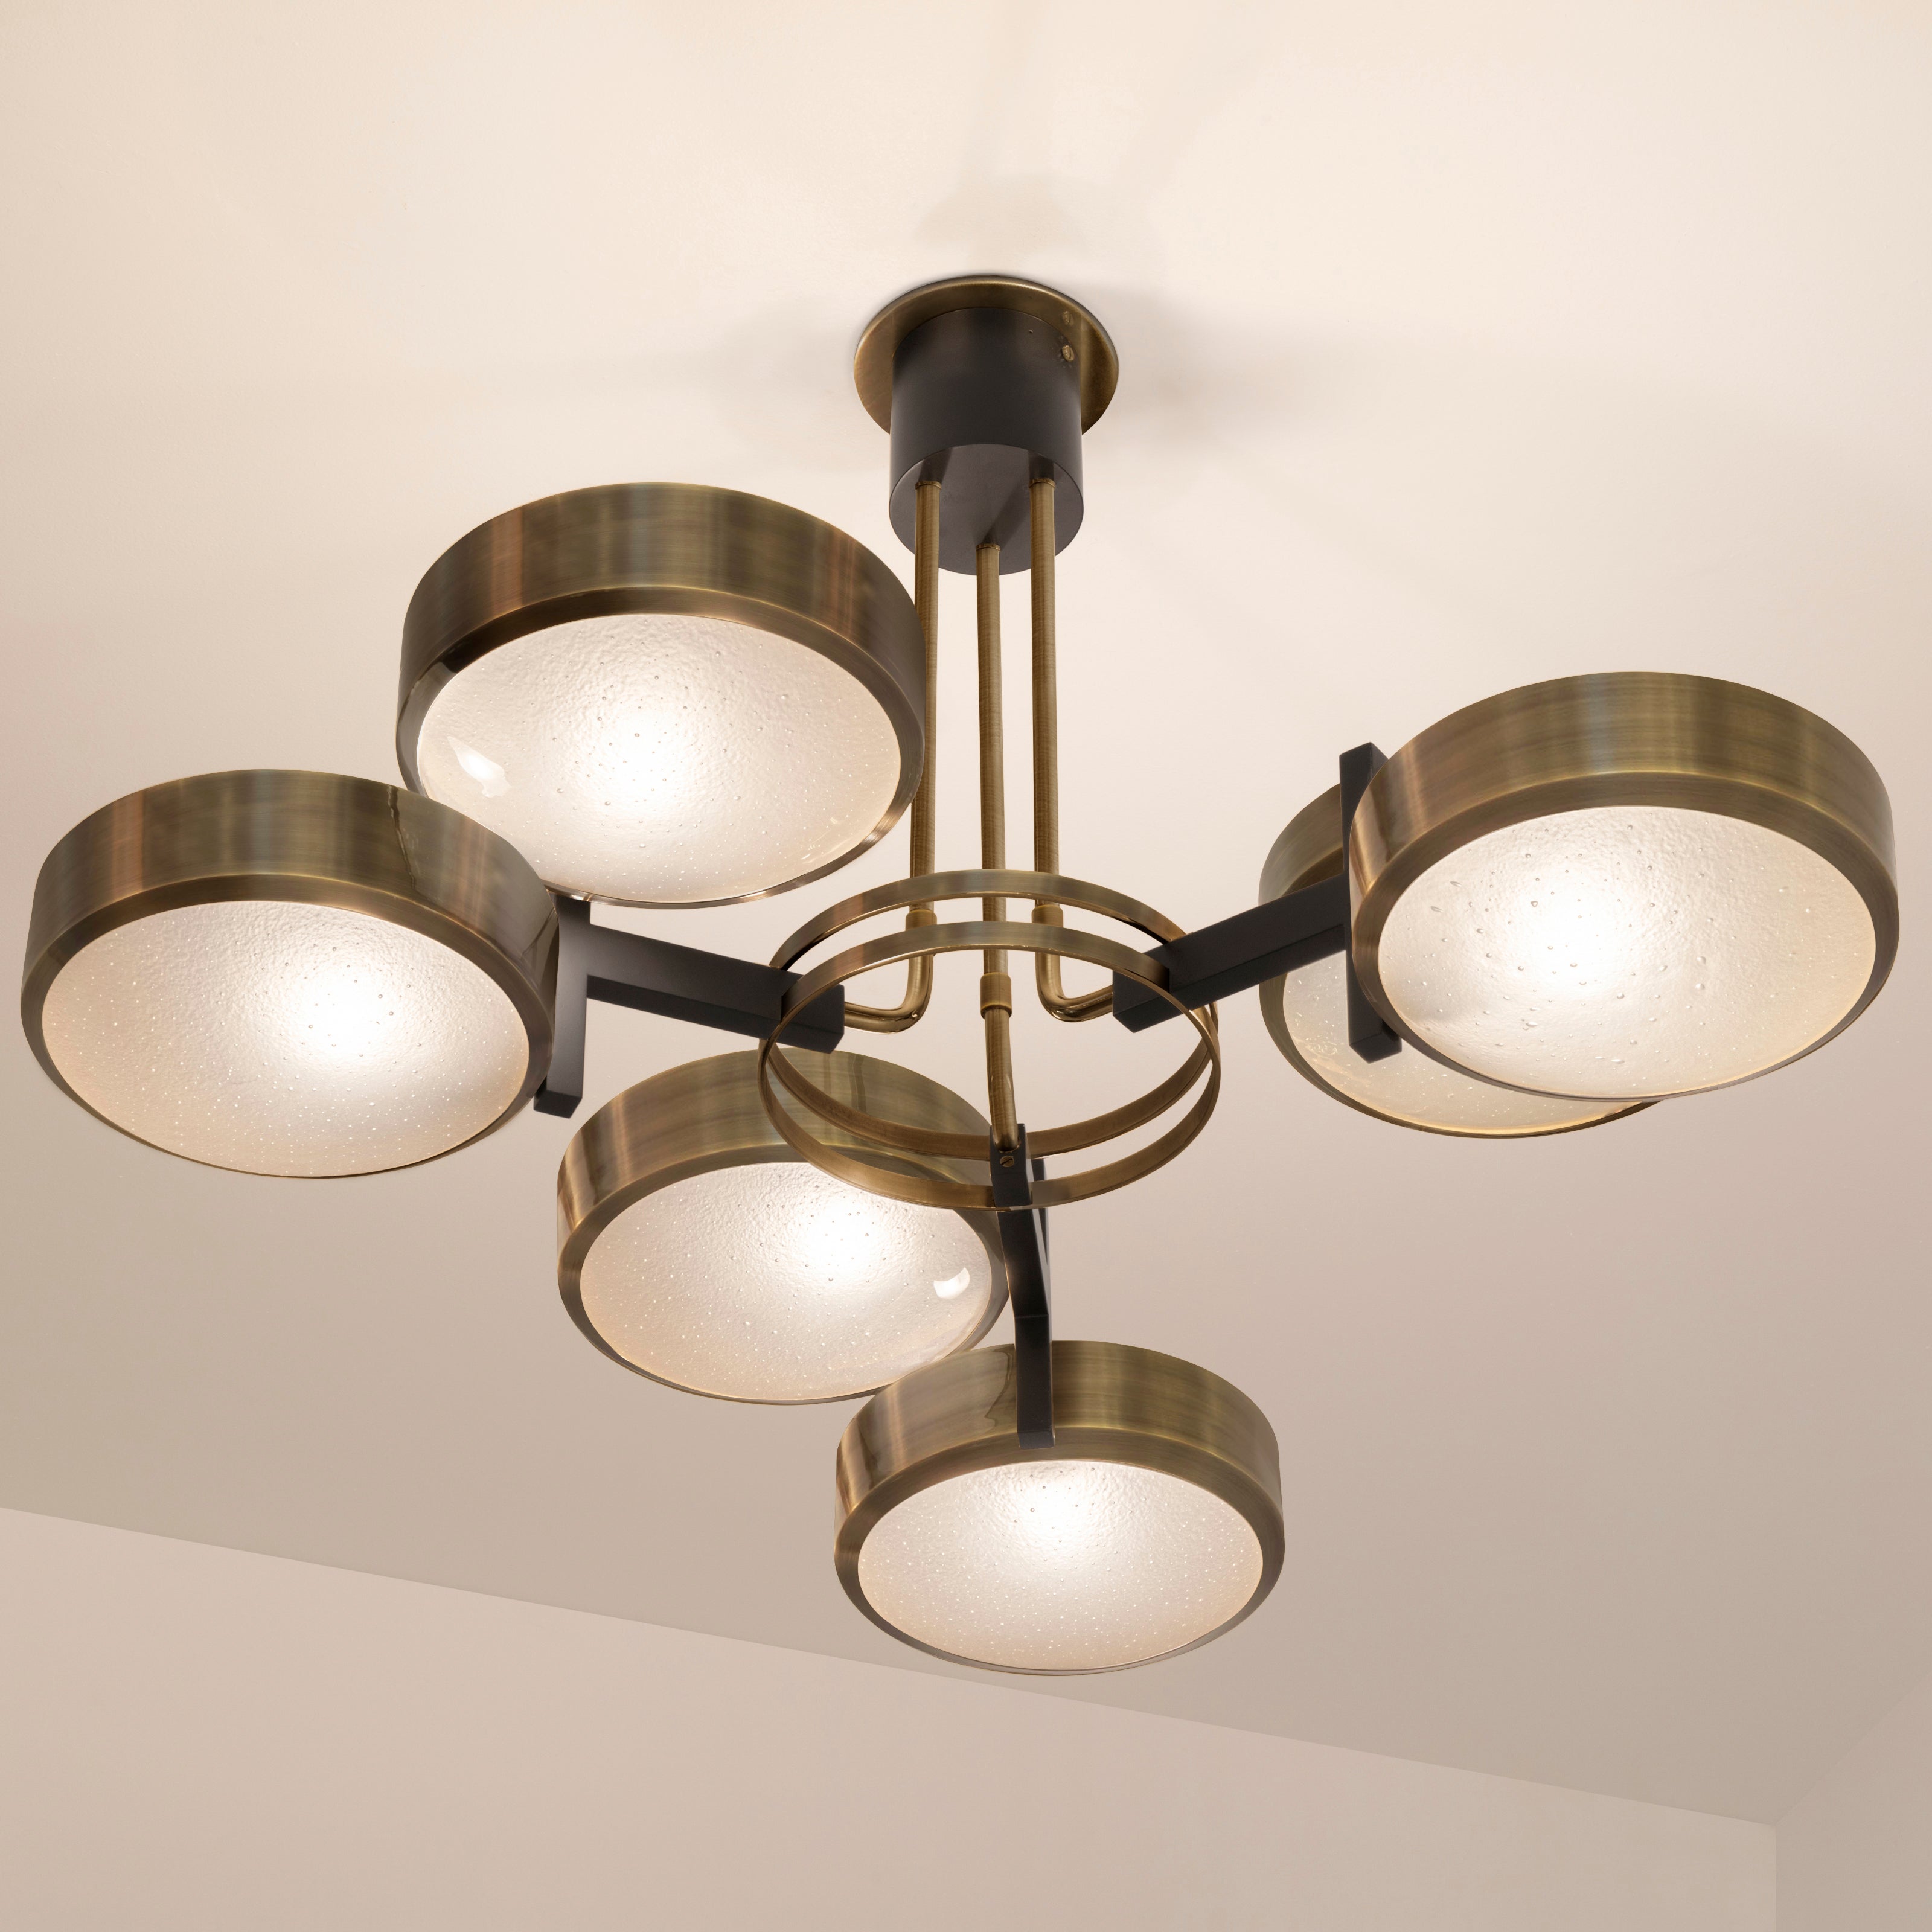 Eclissi Ceiling Light by Gaspare Asaro - Bronze Finish Murano Glass Version For Sale